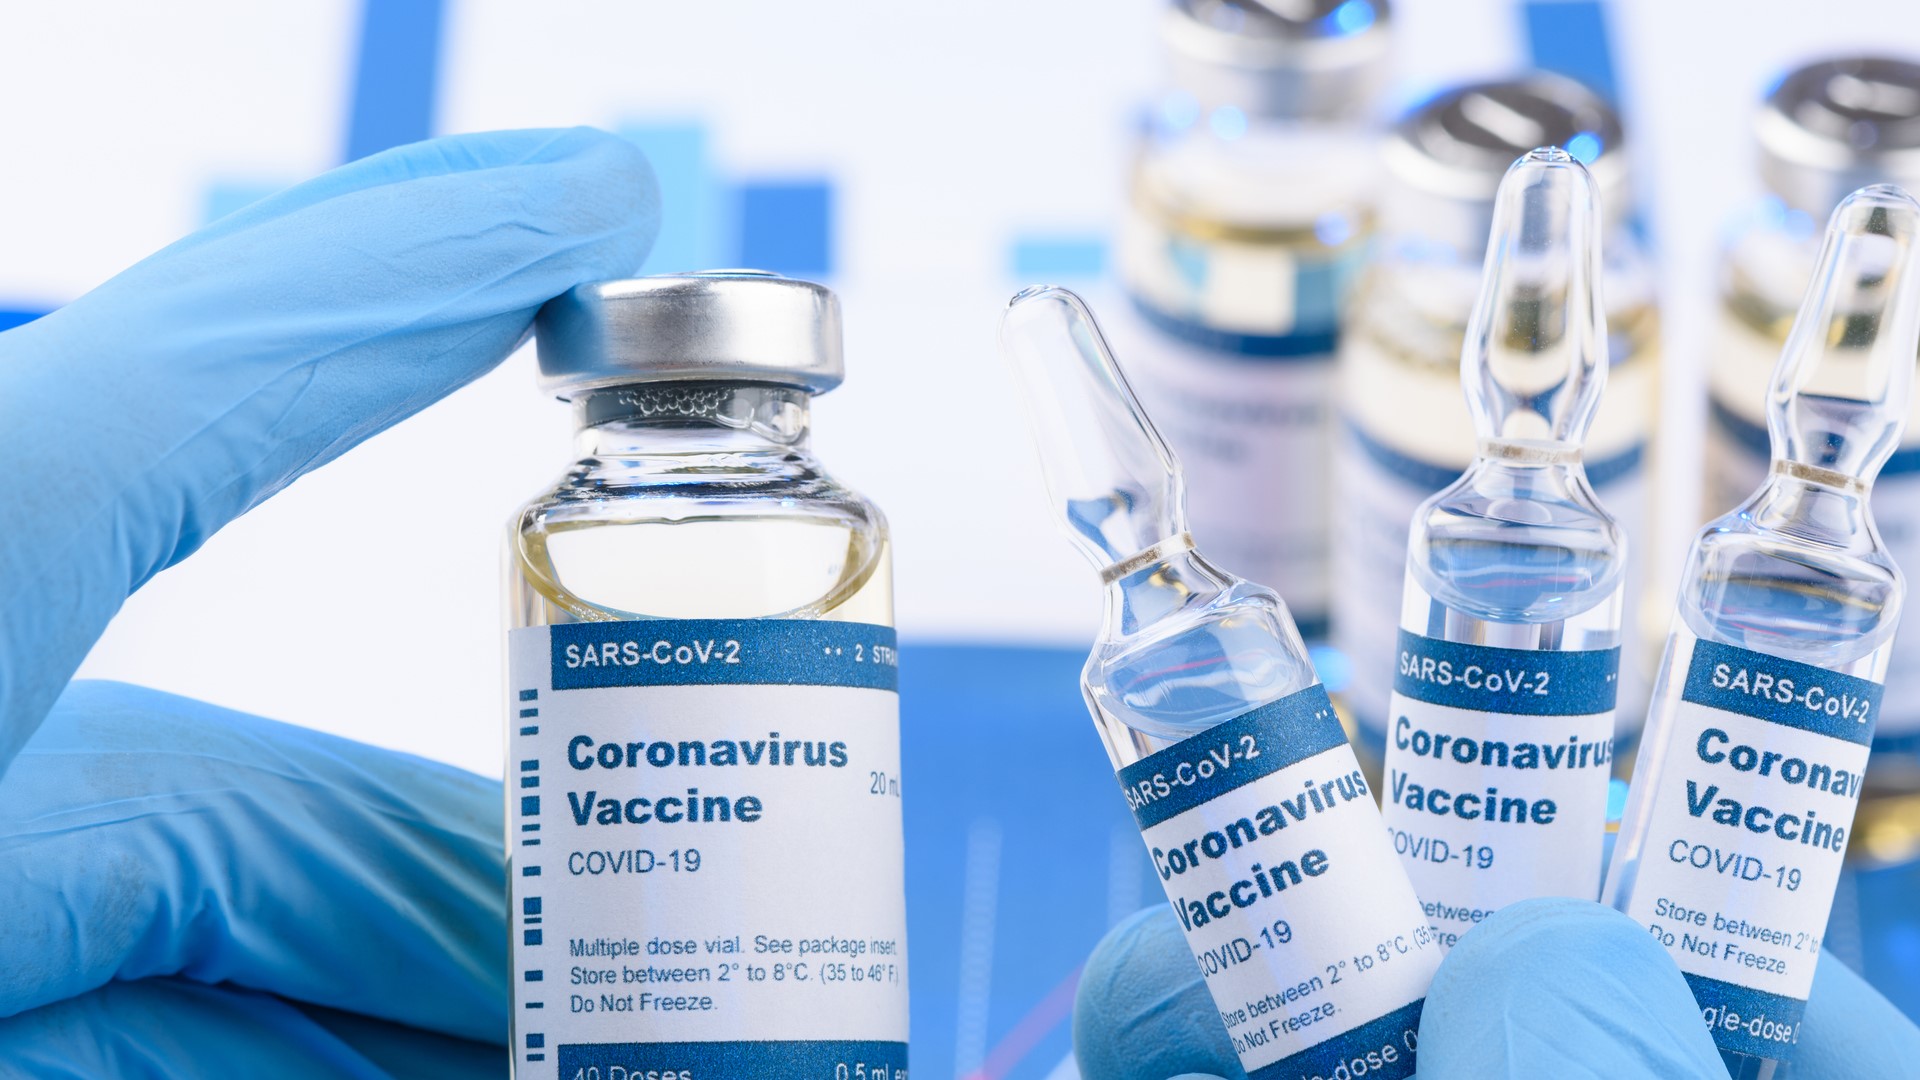 Local 5 spoke with Gail Graham, director of the VA Central Iowa Health Care System, to talk about its distribution of the COVID-19 vaccine.